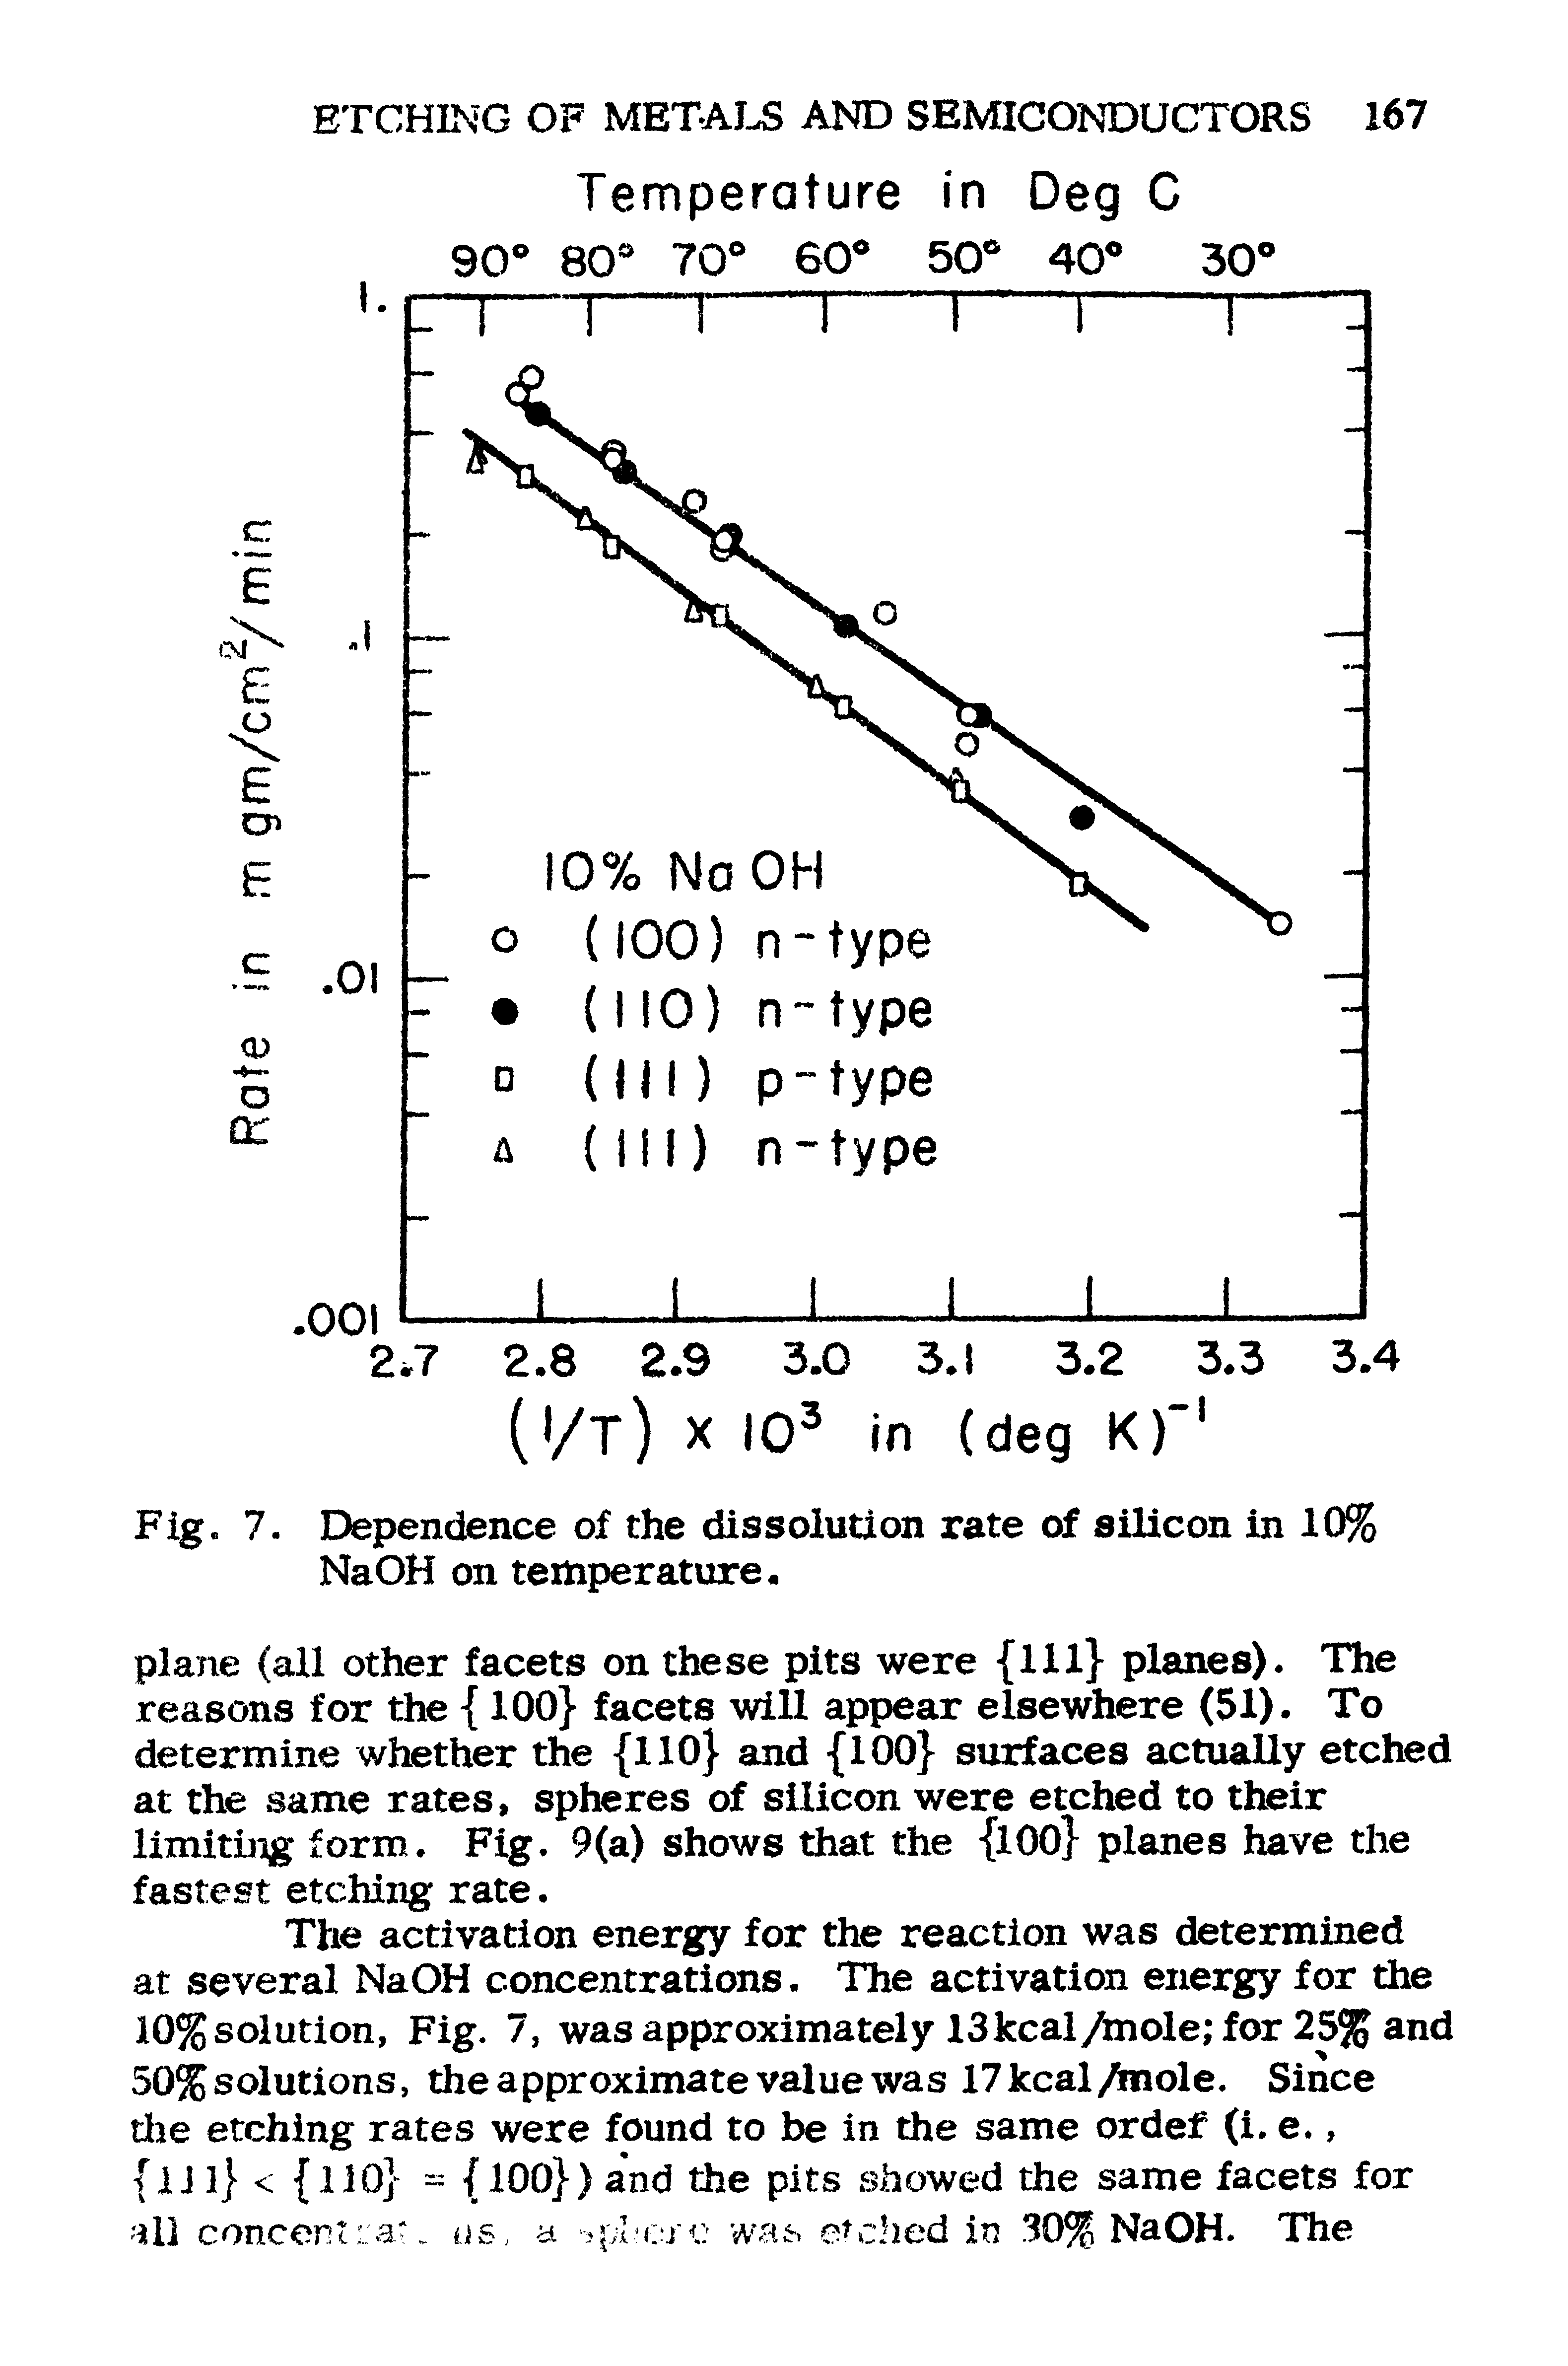 Fig. 7. Dependence of the dissolution rate of silicon in 10% NaOH on temperature.